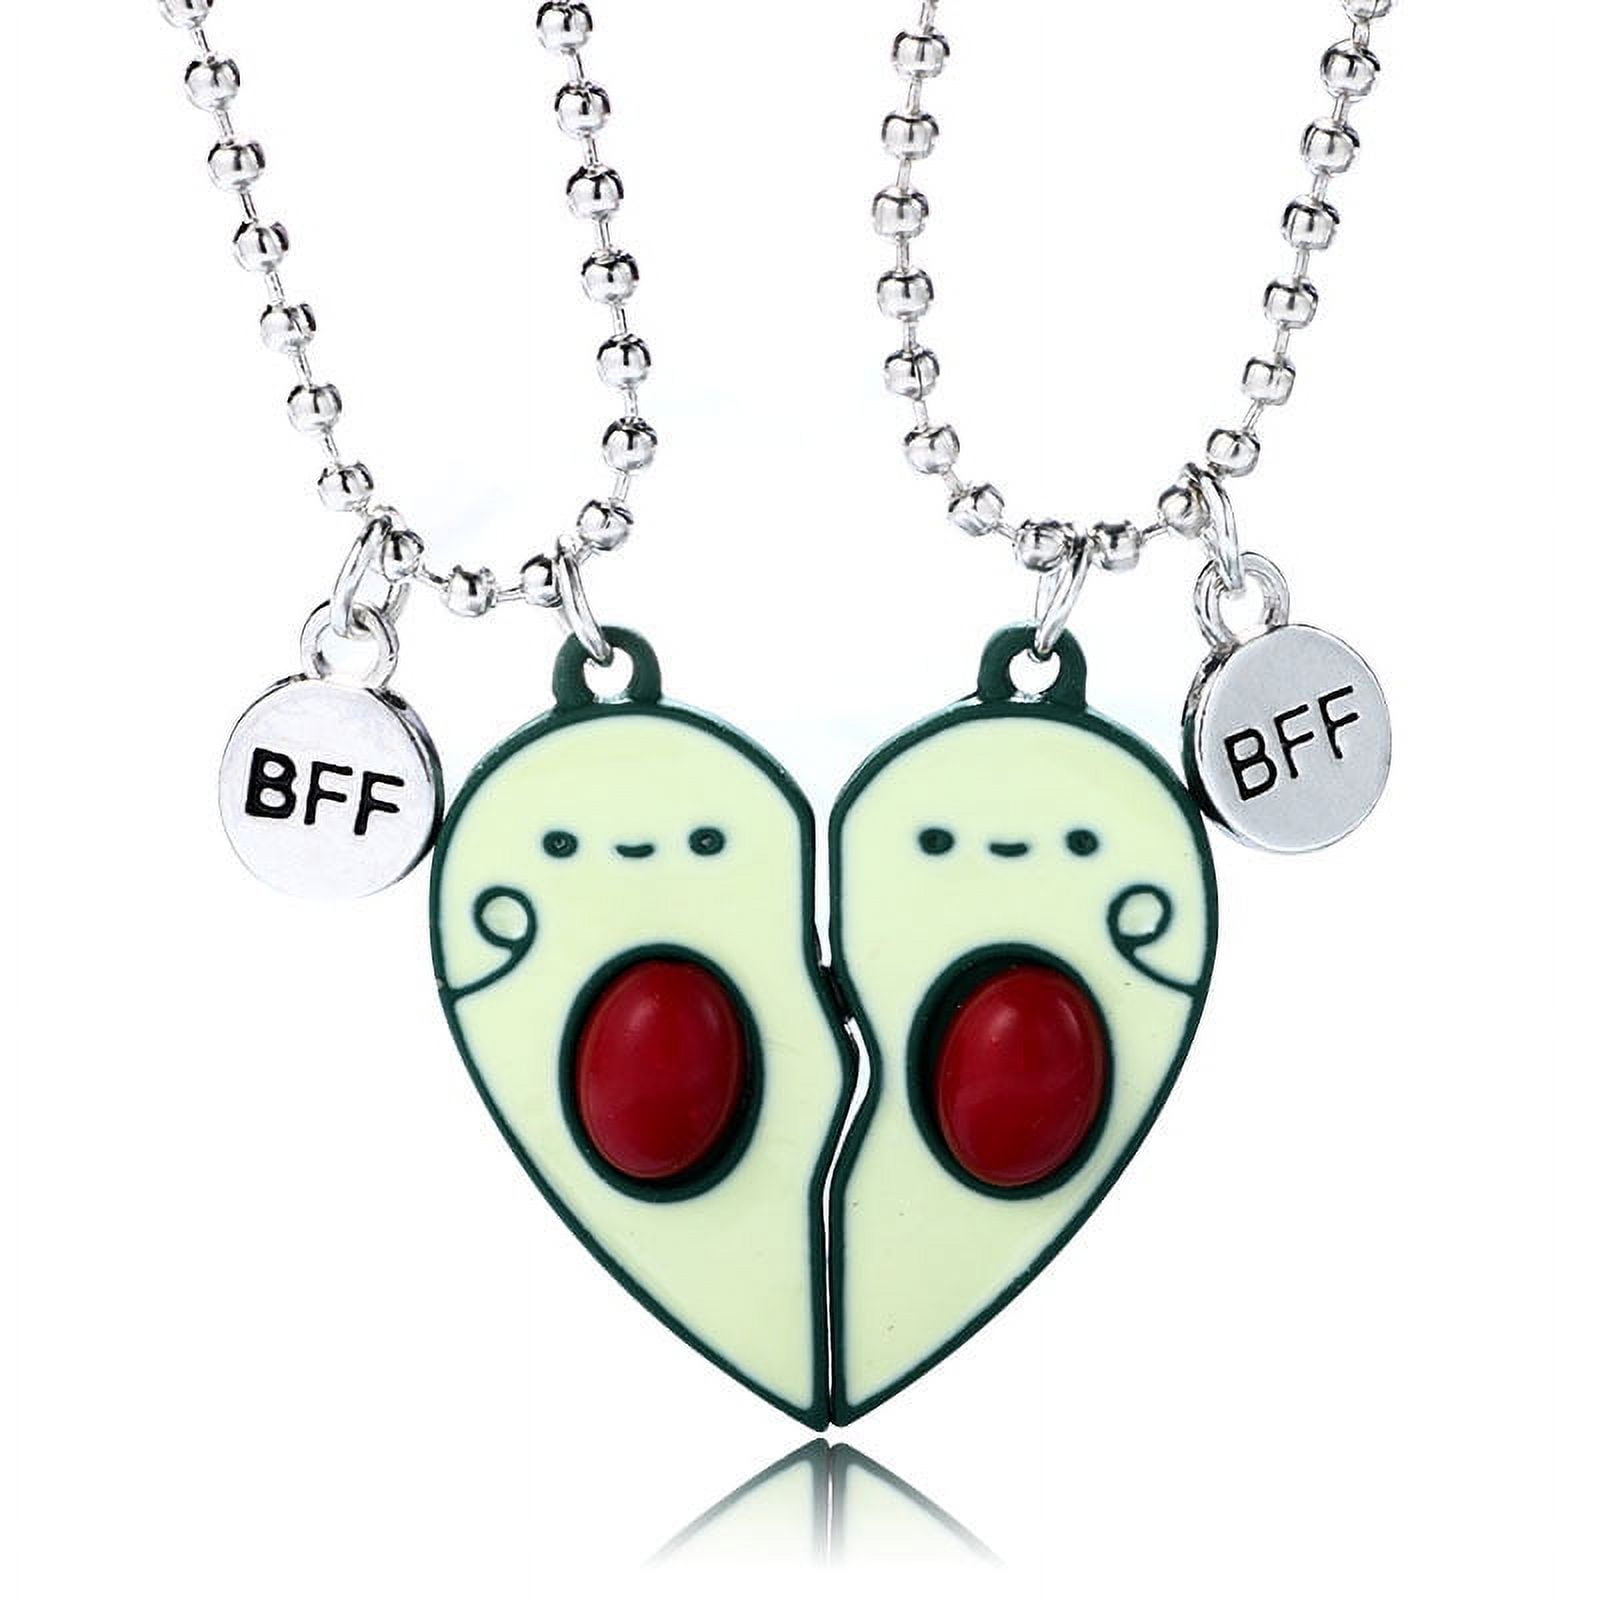 Pendant Necklaces Delicious Pizza Childhood Friendship Chain Cute Triangle  Food Charms Necklace Best Friends Keychain BFF Jewelry Birtay GiftsL231218  From Designer_sunglasses_, $3.03 | DHgate.Com